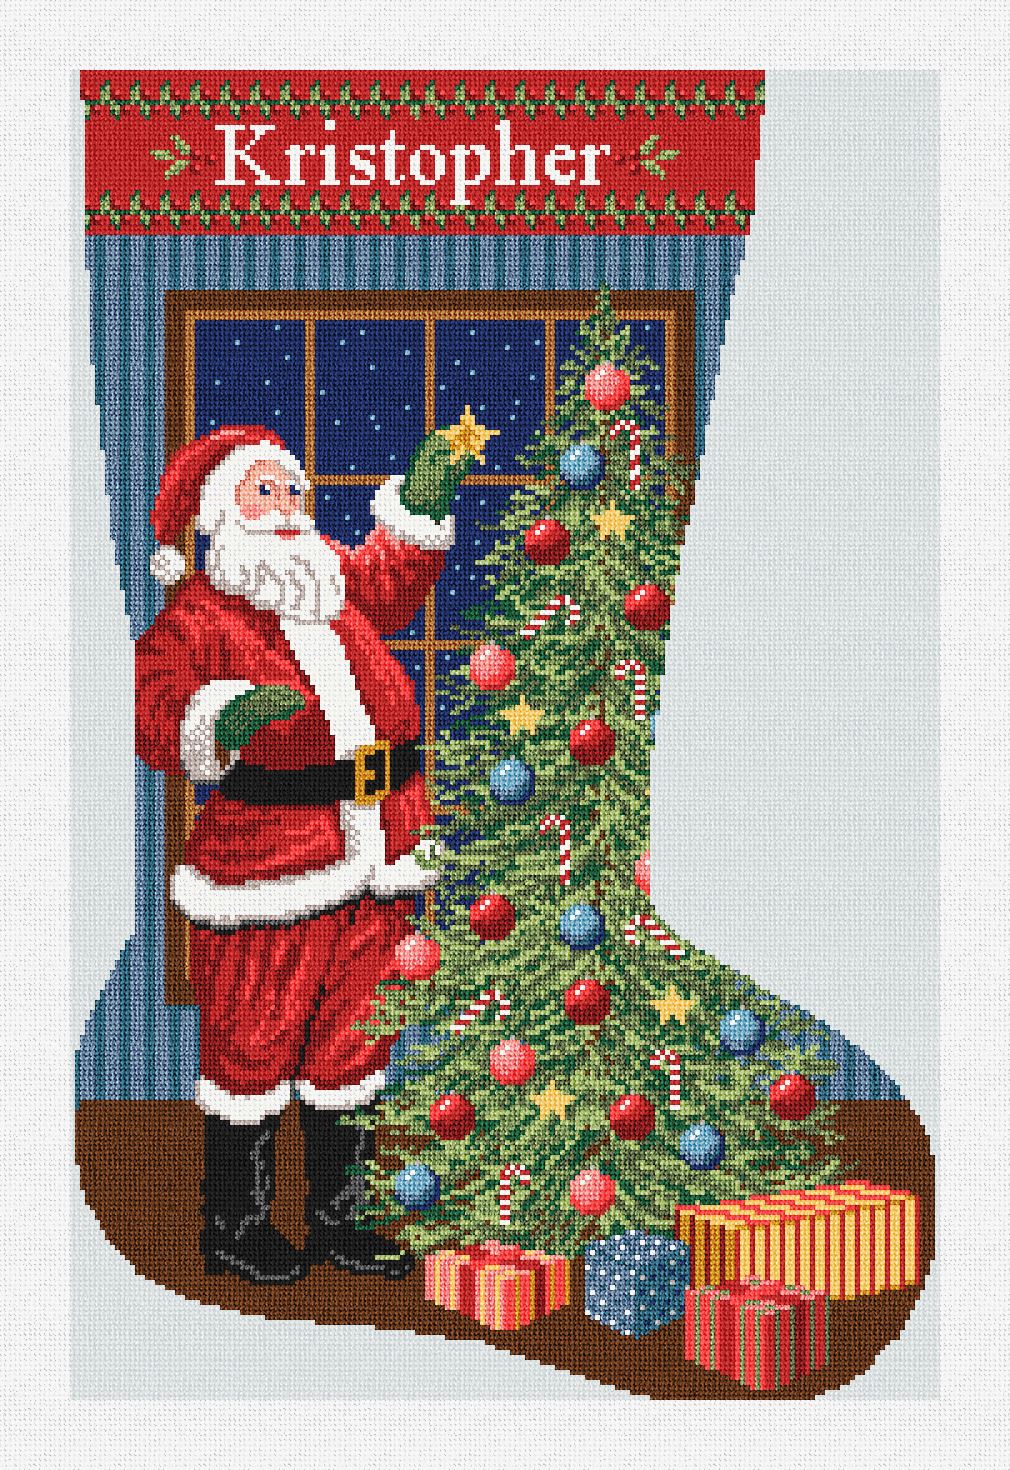 Chill Out Needlepoint Christmas Stocking Kit